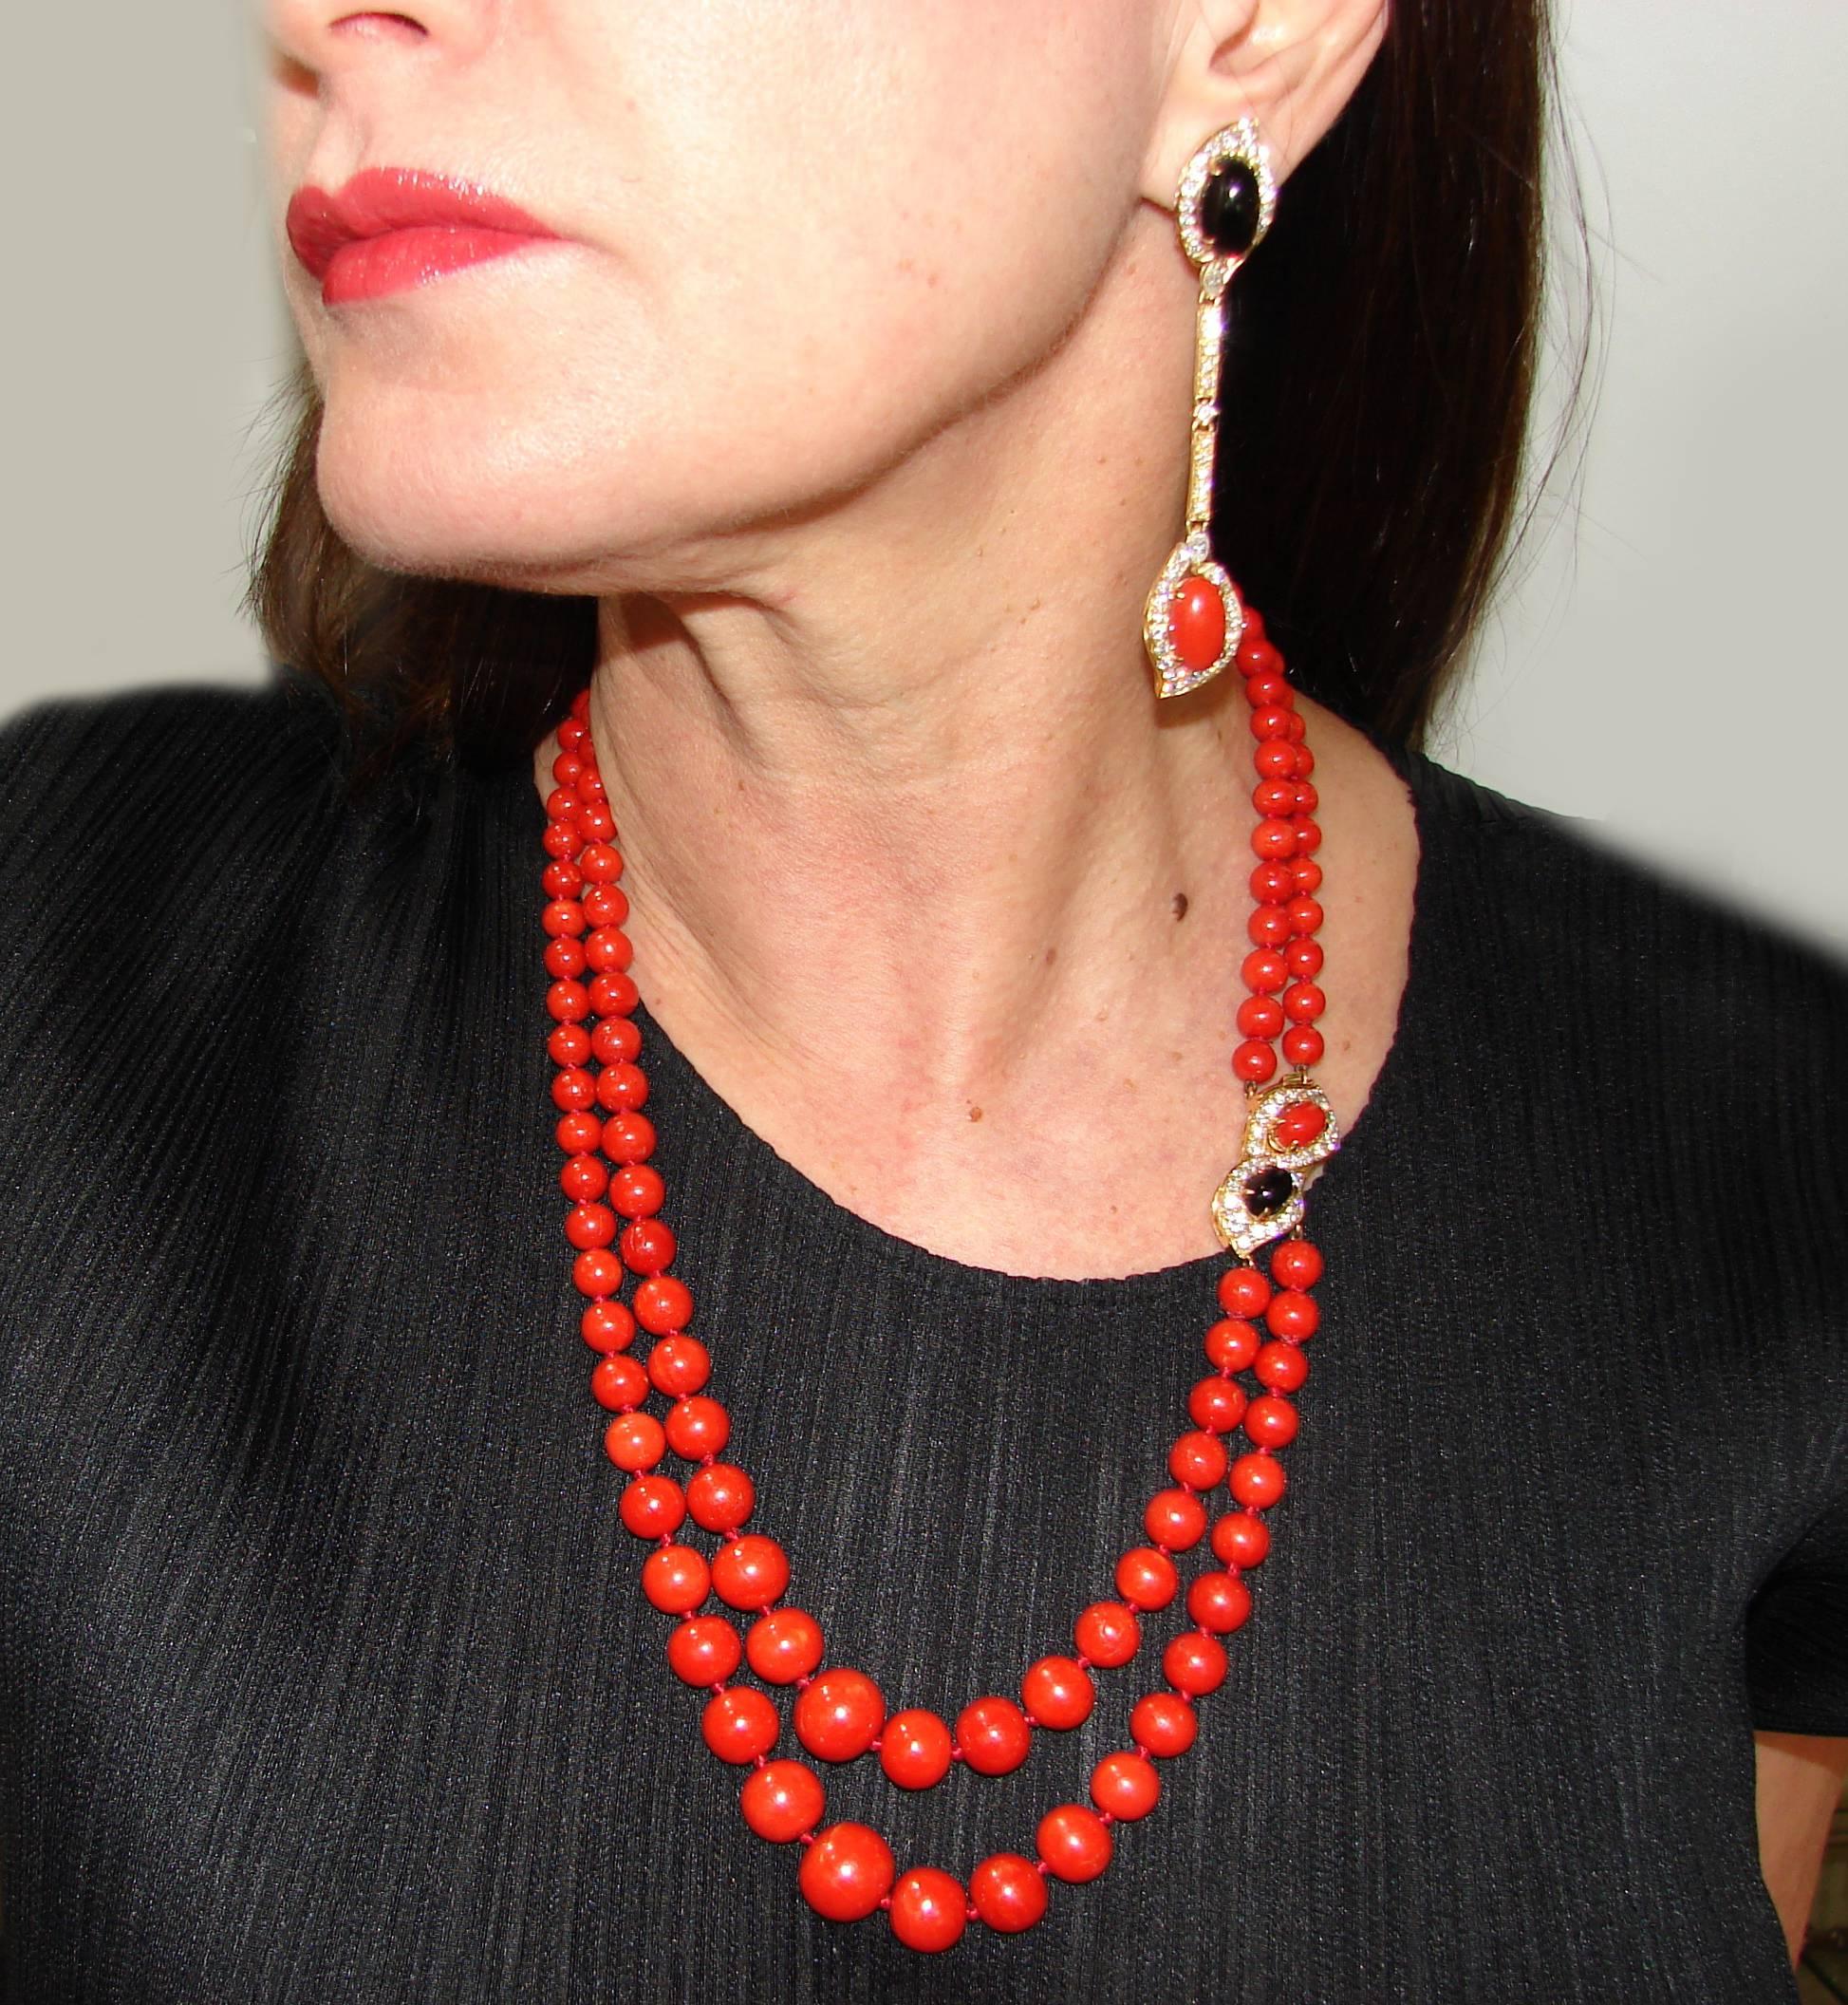 Gorgeous set consisting of a necklace and a pair of earrings created by Bulgari in Italy in the end of 1970's. Features finest quality oxblood Mediterranean coral beads culminating with an 18 karat yellow gold clasp encrusted with round brilliant 